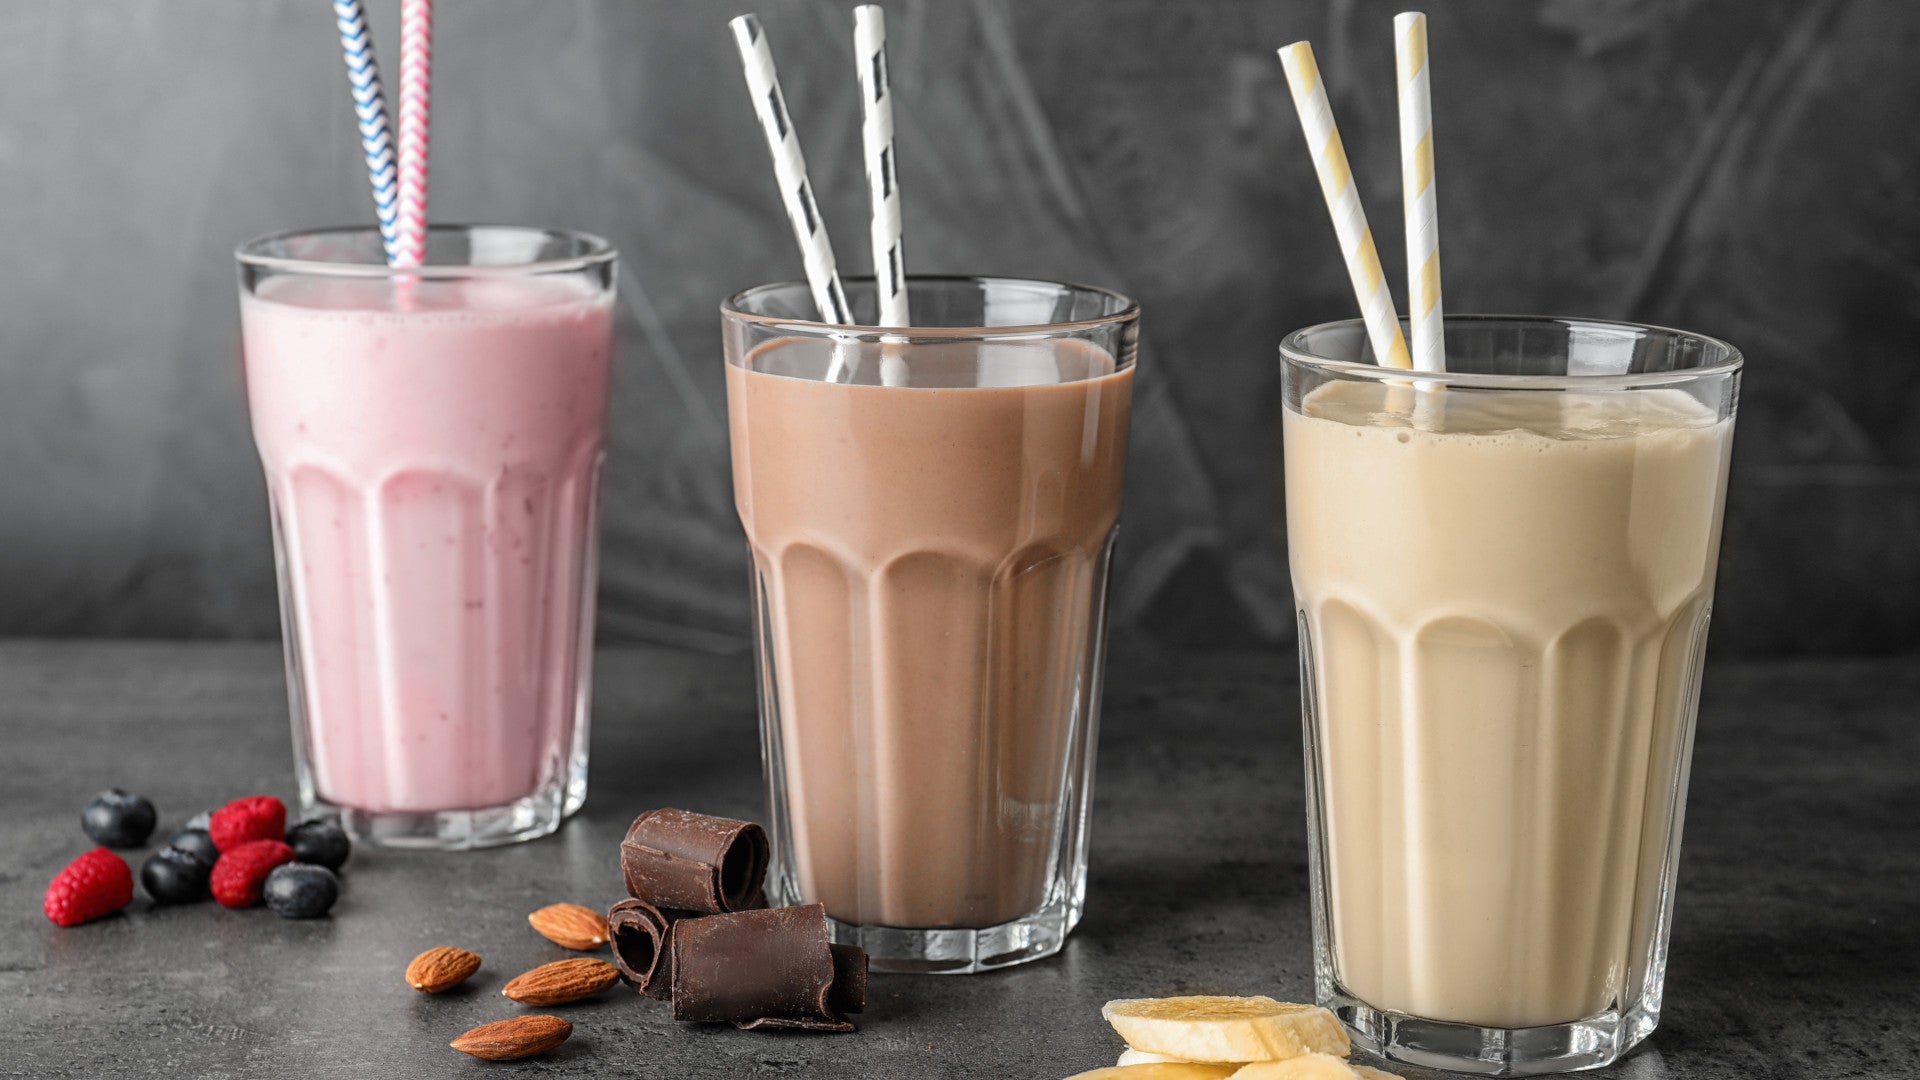 Best meal replacement shakes